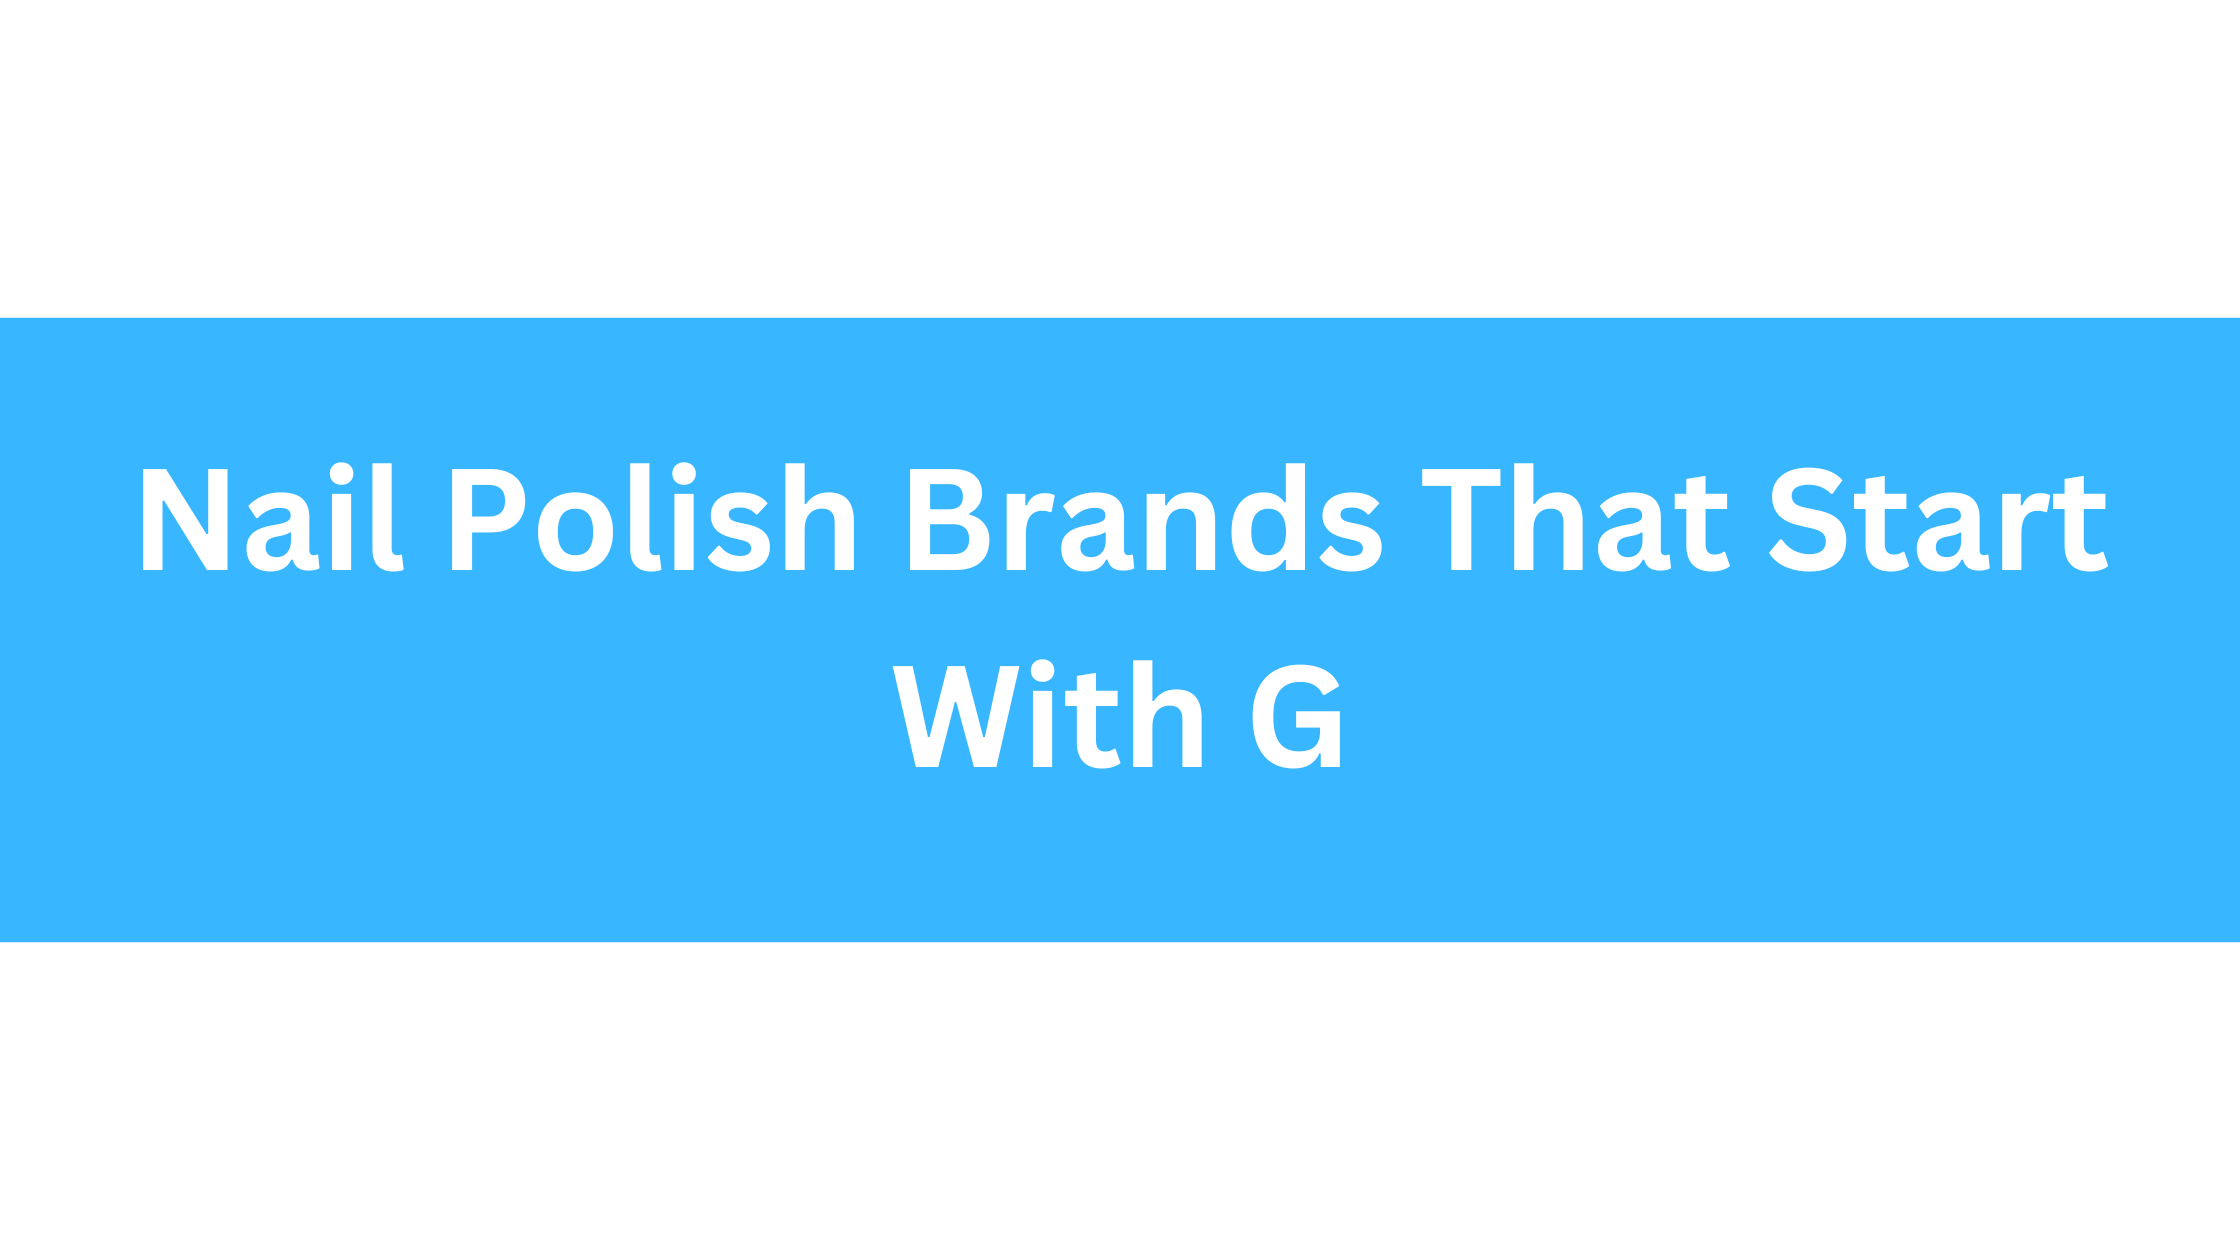 Nail Polish Brands That Start With G